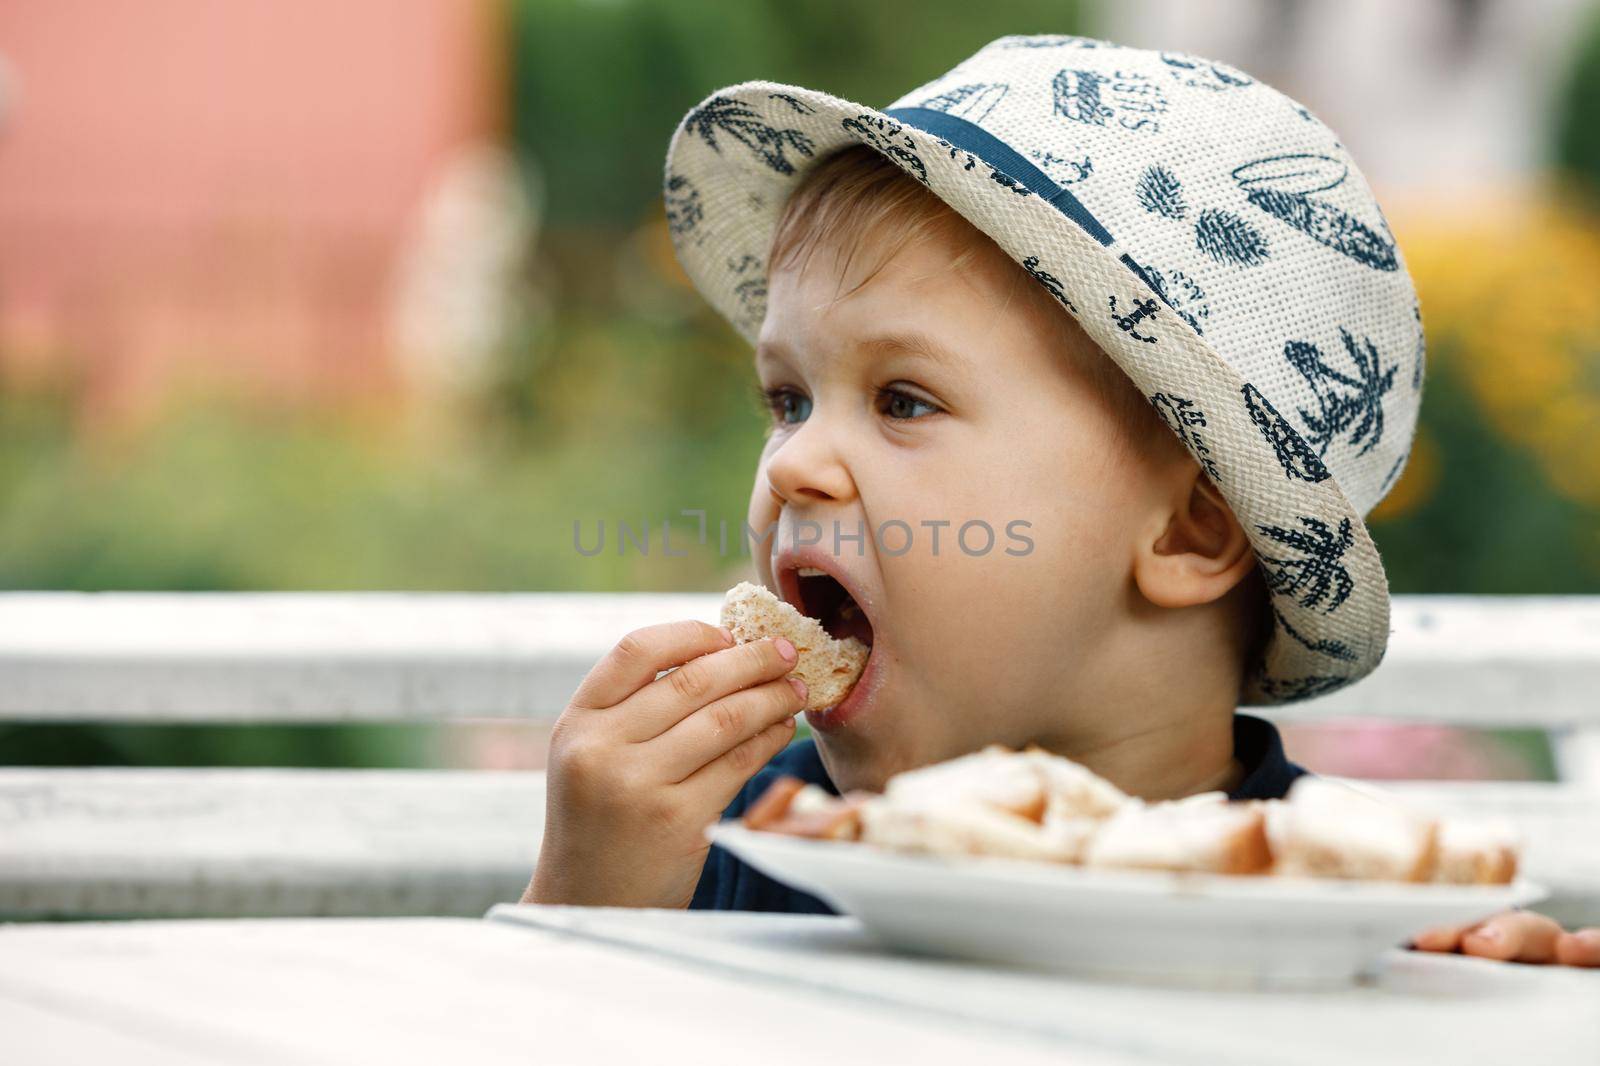 Close up image of Caucasian baby boy with blonde hair and hat opening mouth going to bite crispy bread, having joyful facial expression. by Lincikas